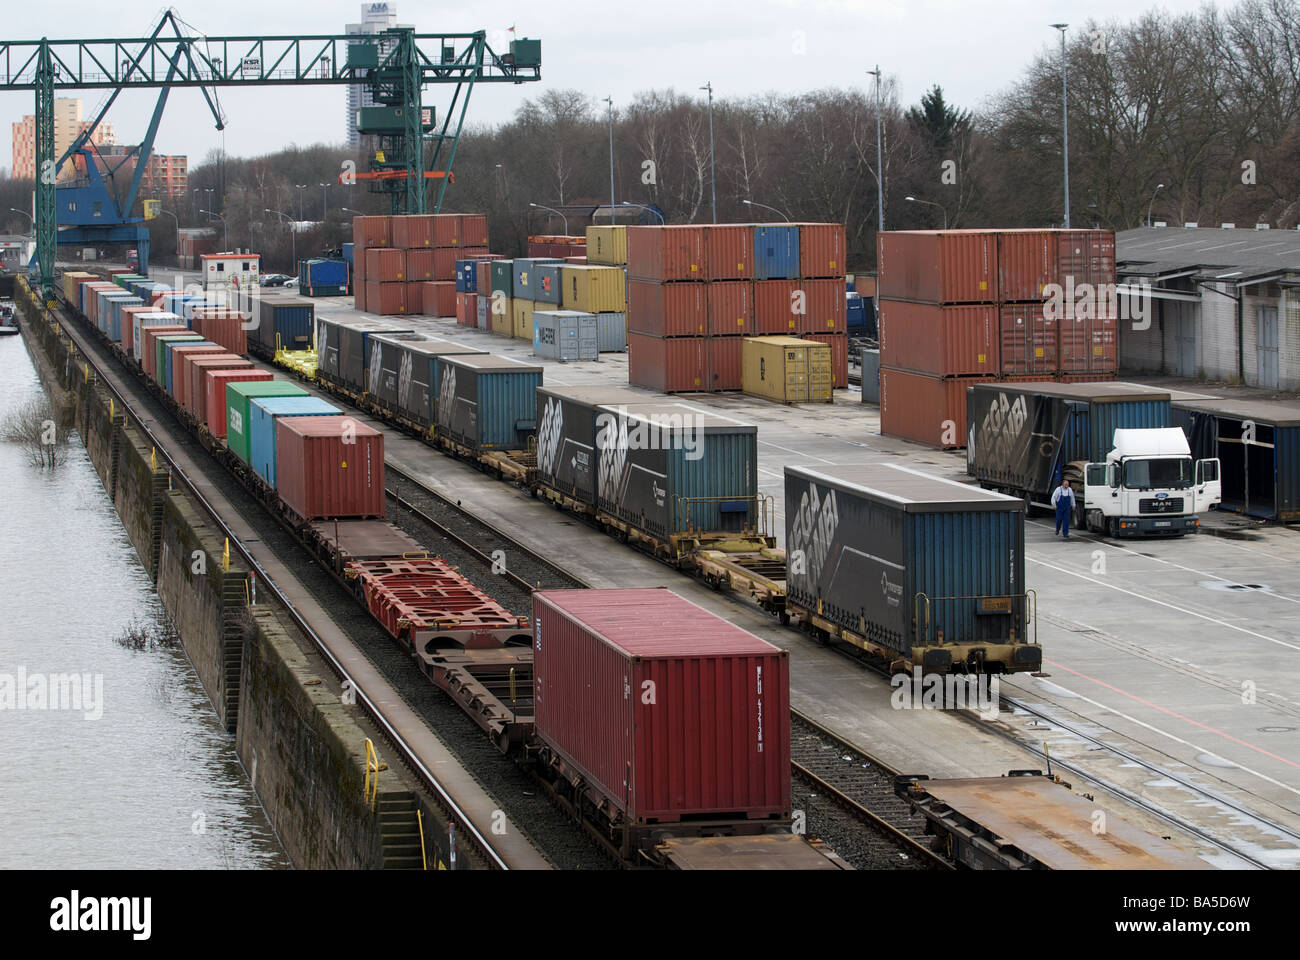 Neihl 1 container terminal, Cologne, North Rhine-Westphalia, Germany. Stock Photo